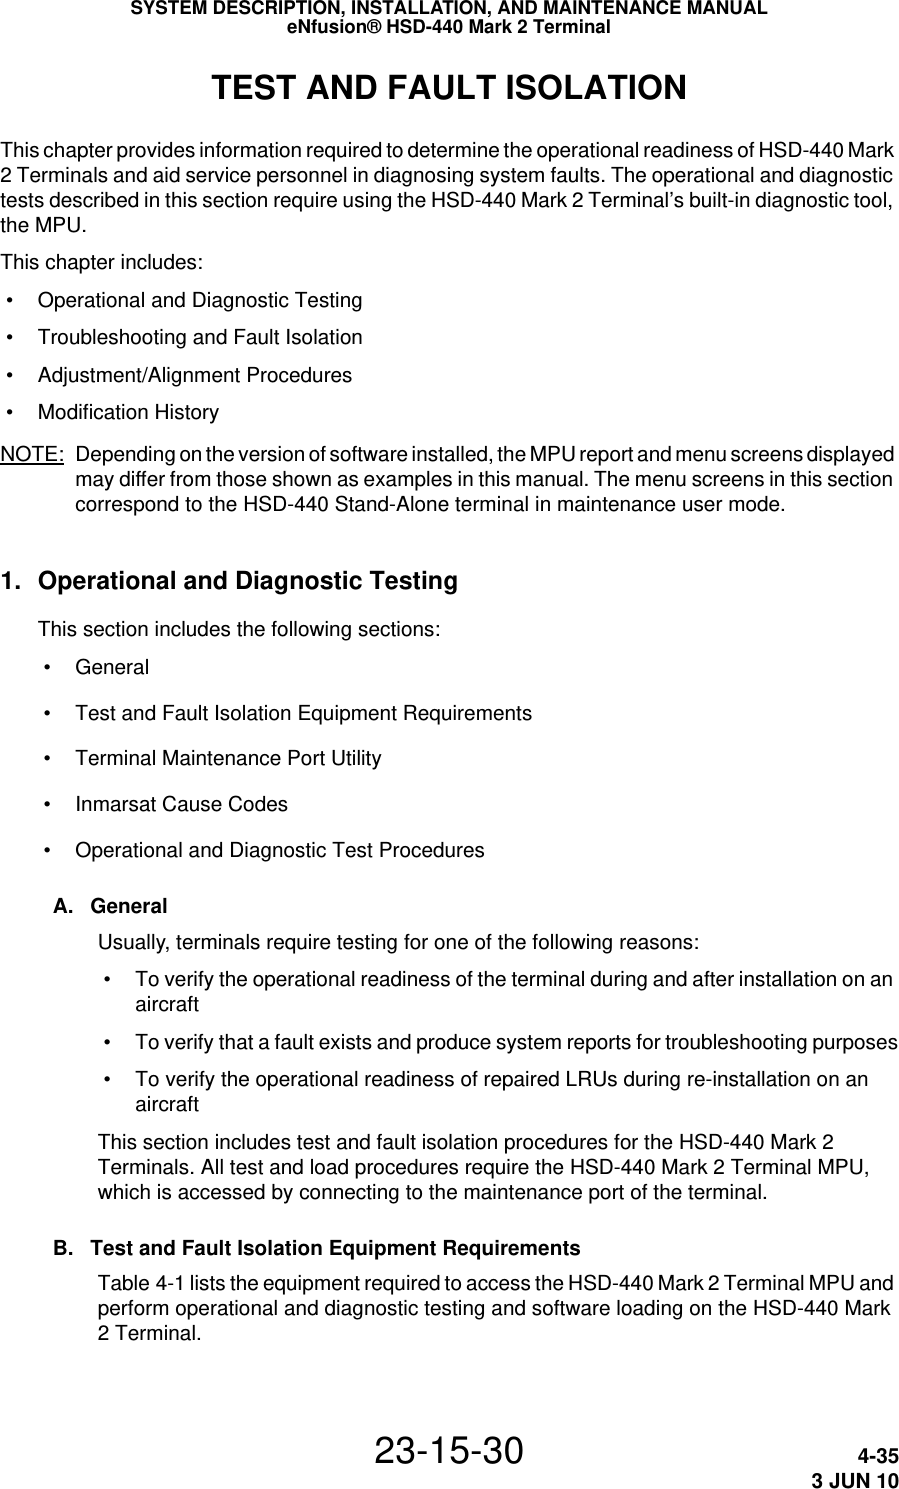 SYSTEM DESCRIPTION, INSTALLATION, AND MAINTENANCE MANUALeNfusion® HSD-440 Mark 2 Terminal23-15-30 4-353 JUN 10TEST AND FAULT ISOLATIONThis chapter provides information required to determine the operational readiness of HSD-440 Mark 2 Terminals and aid service personnel in diagnosing system faults. The operational and diagnostic tests described in this section require using the HSD-440 Mark 2 Terminal’s built-in diagnostic tool, the MPU.This chapter includes: • Operational and Diagnostic Testing • Troubleshooting and Fault Isolation • Adjustment/Alignment Procedures • Modification History NOTE: Depending on the version of software installed, the MPU report and menu screens displayed may differ from those shown as examples in this manual. The menu screens in this section correspond to the HSD-440 Stand-Alone terminal in maintenance user mode.1. Operational and Diagnostic TestingThis section includes the following sections: • General • Test and Fault Isolation Equipment Requirements • Terminal Maintenance Port Utility • Inmarsat Cause Codes • Operational and Diagnostic Test ProceduresA. GeneralUsually, terminals require testing for one of the following reasons: • To verify the operational readiness of the terminal during and after installation on an aircraft • To verify that a fault exists and produce system reports for troubleshooting purposes • To verify the operational readiness of repaired LRUs during re-installation on an aircraftThis section includes test and fault isolation procedures for the HSD-440 Mark 2 Terminals. All test and load procedures require the HSD-440 Mark 2 Terminal MPU, which is accessed by connecting to the maintenance port of the terminal. B. Test and Fault Isolation Equipment RequirementsTable 4-1 lists the equipment required to access the HSD-440 Mark 2 Terminal MPU and perform operational and diagnostic testing and software loading on the HSD-440 Mark 2 Terminal. 